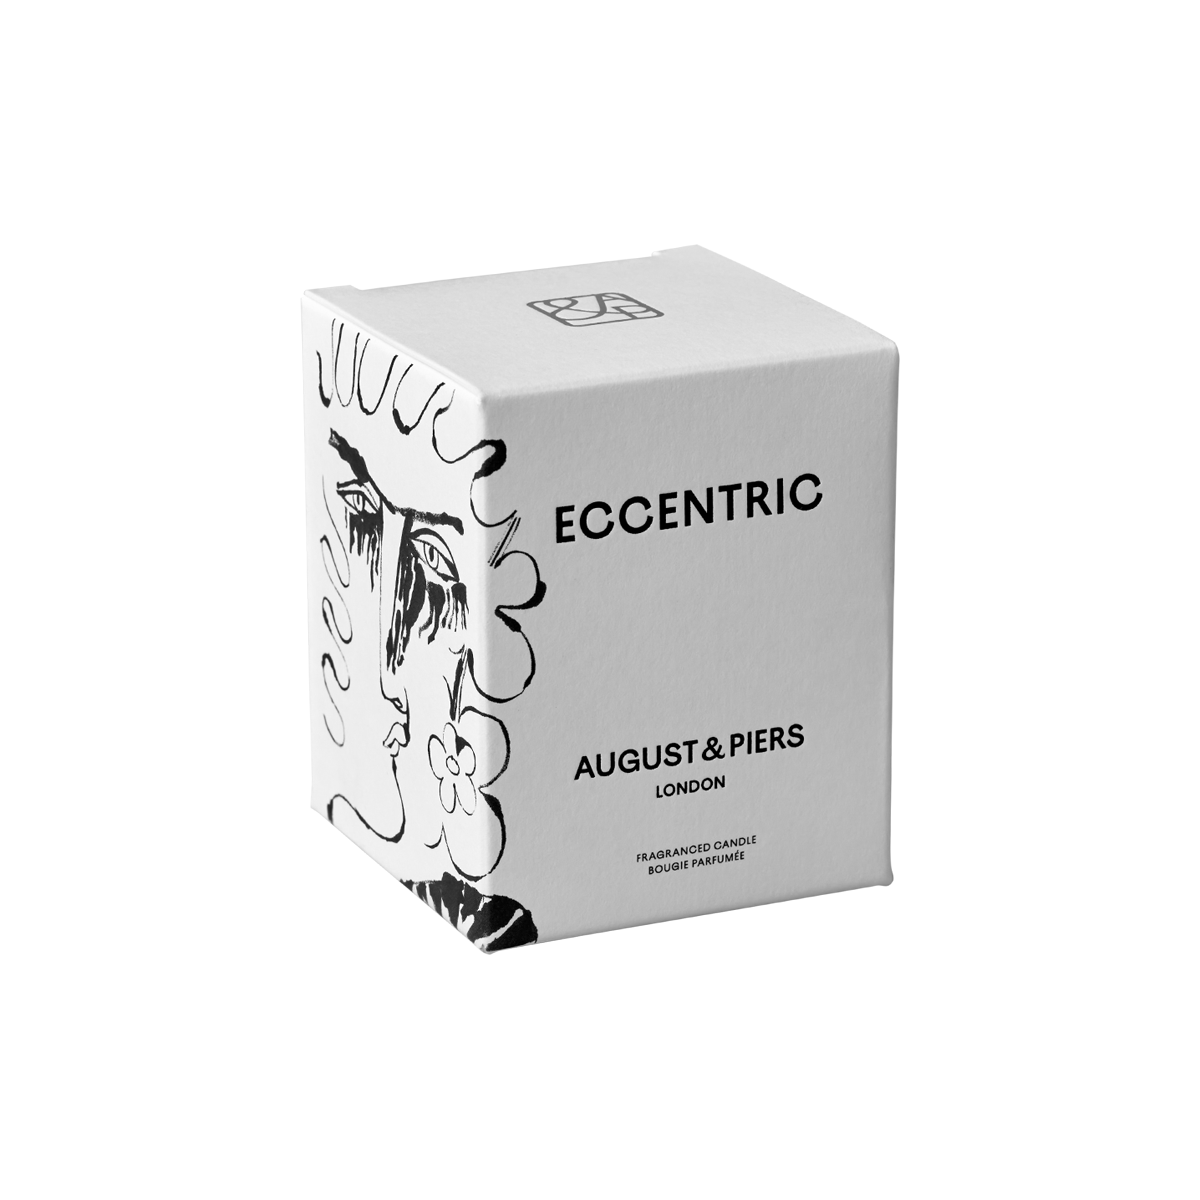 AUGUST&PIERS - Eccentric Scented Candle